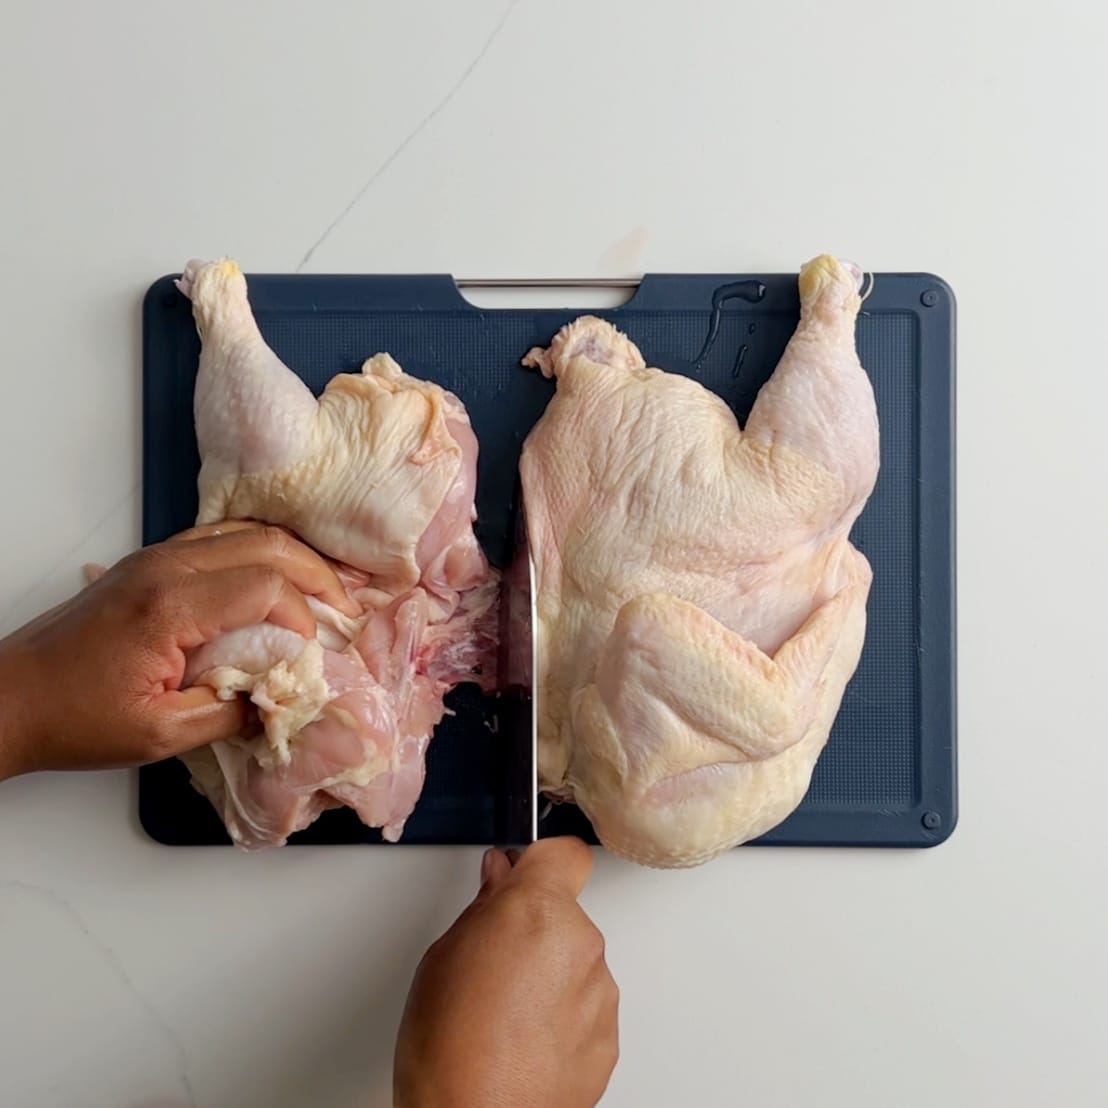 whole chicken cut in half on a blue cutting board. Brown hands holding a knife in between the chicken halves in a slicing motion.